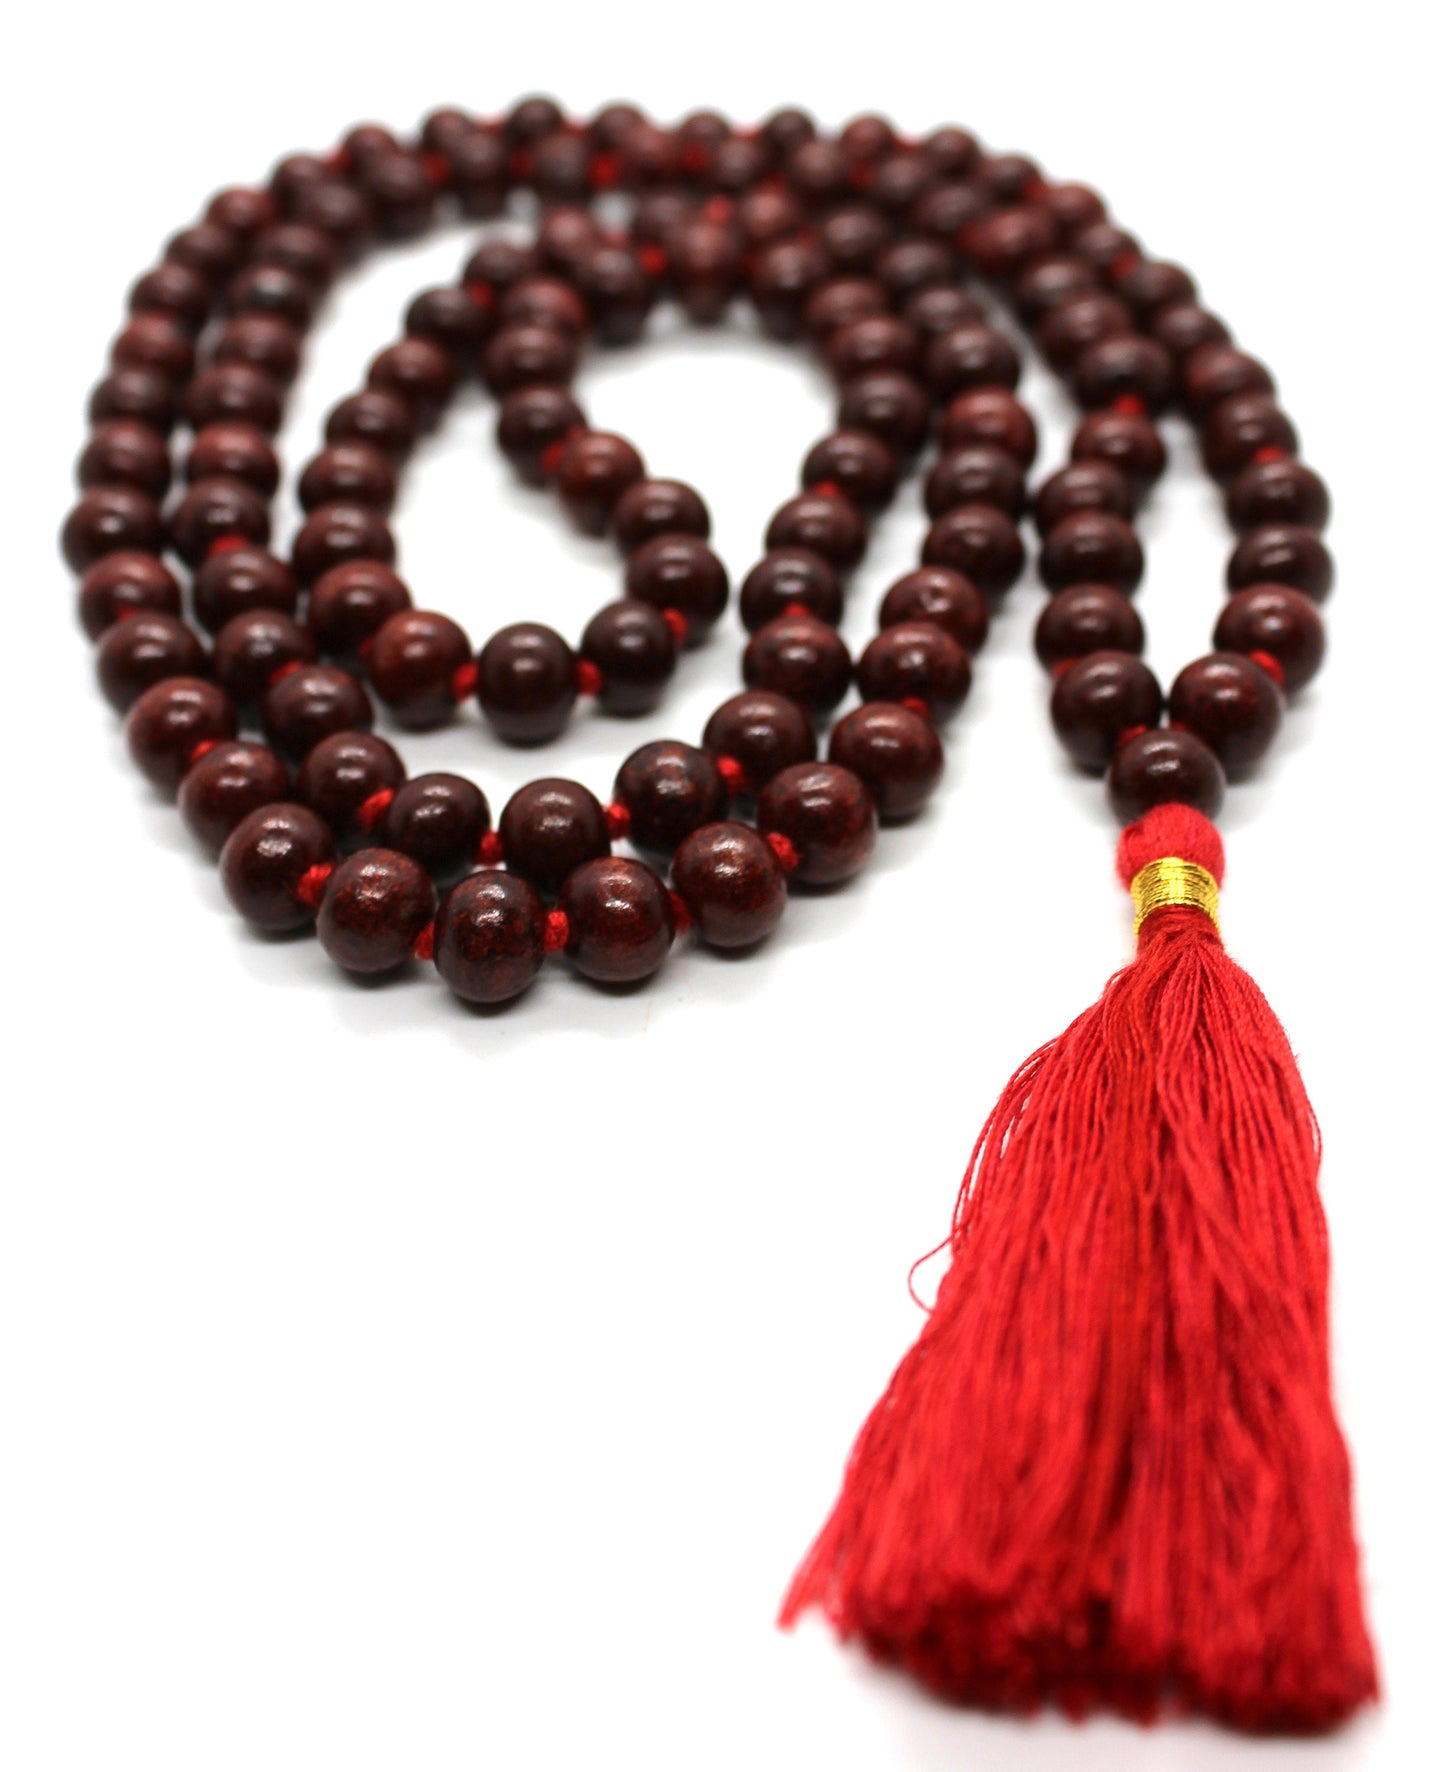 8mm Indian Rosewood with Red / Premium Cotton String TasselClassic 108 Knotted Meditation Mala | Elegant Natural Design | Yoga Necklace